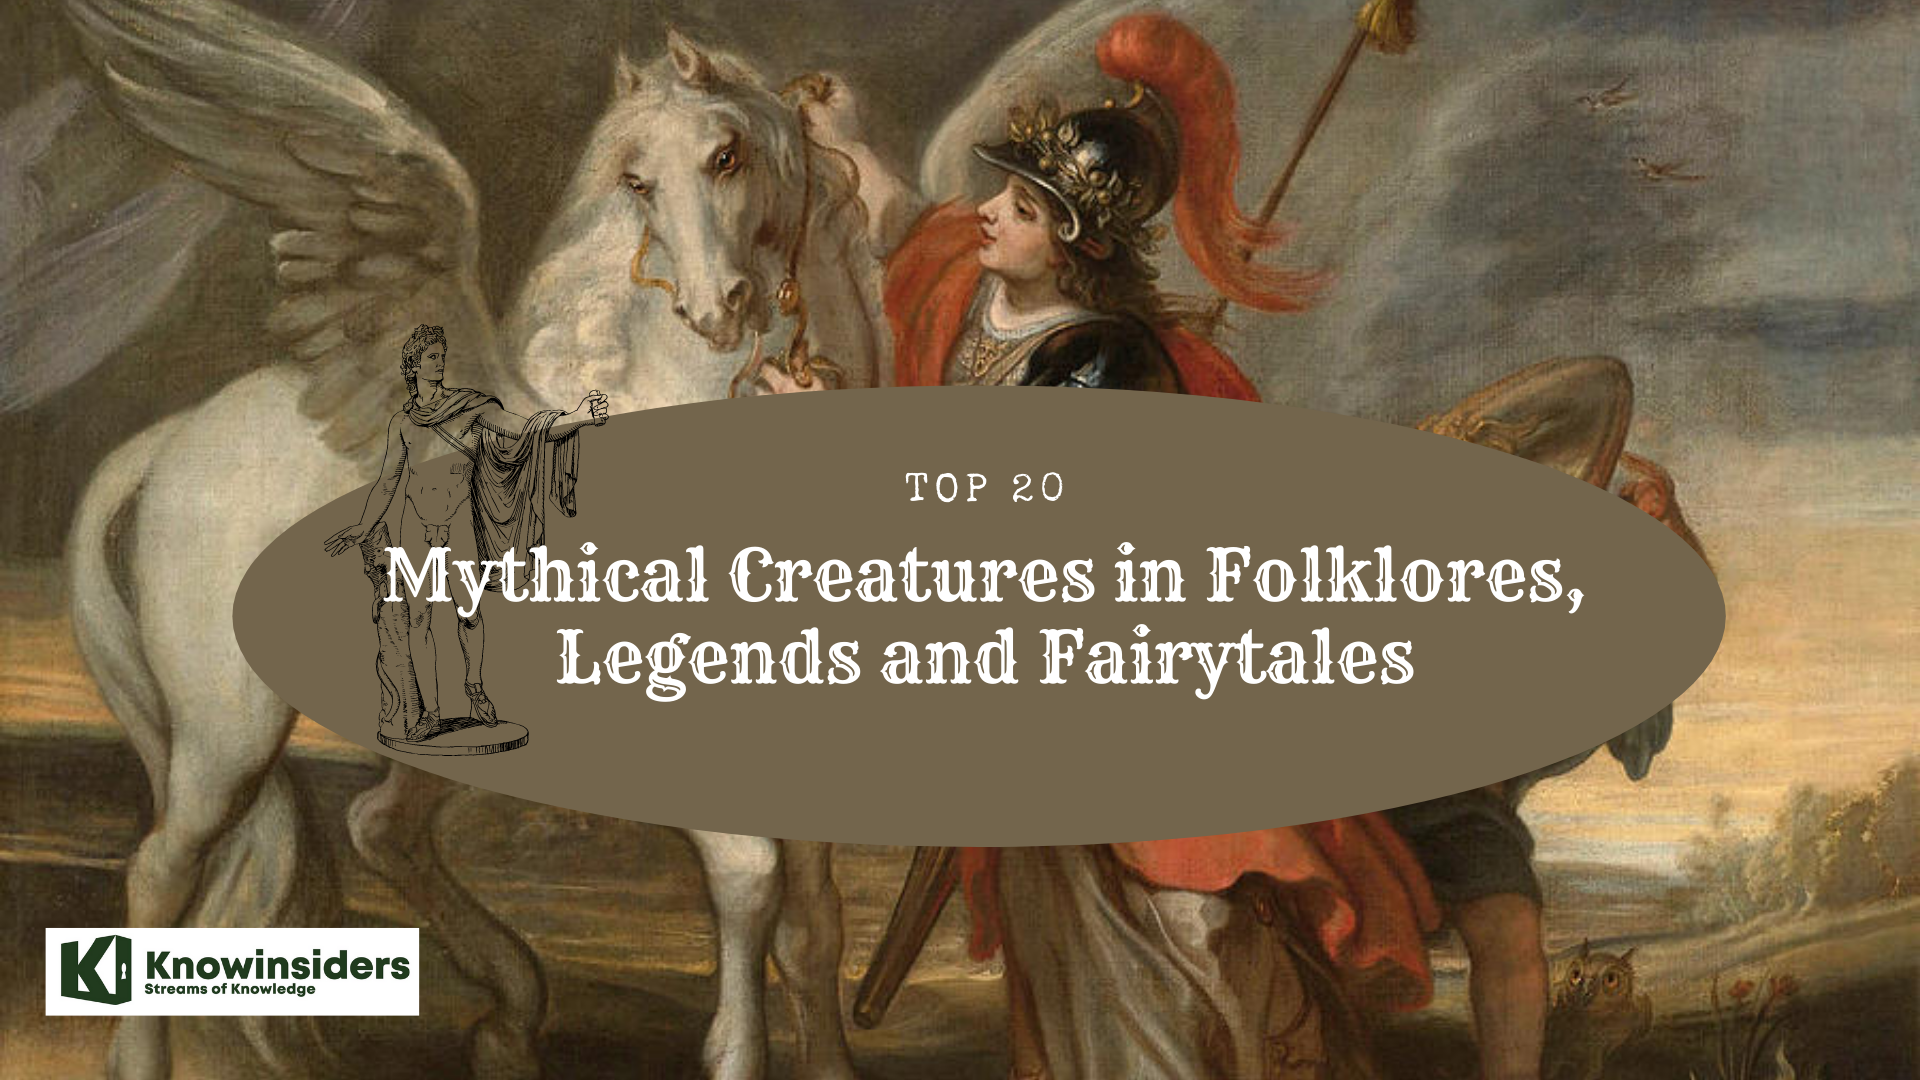 Top 20 Most Mythical Creatures From Legends, Folklore and Fairytales